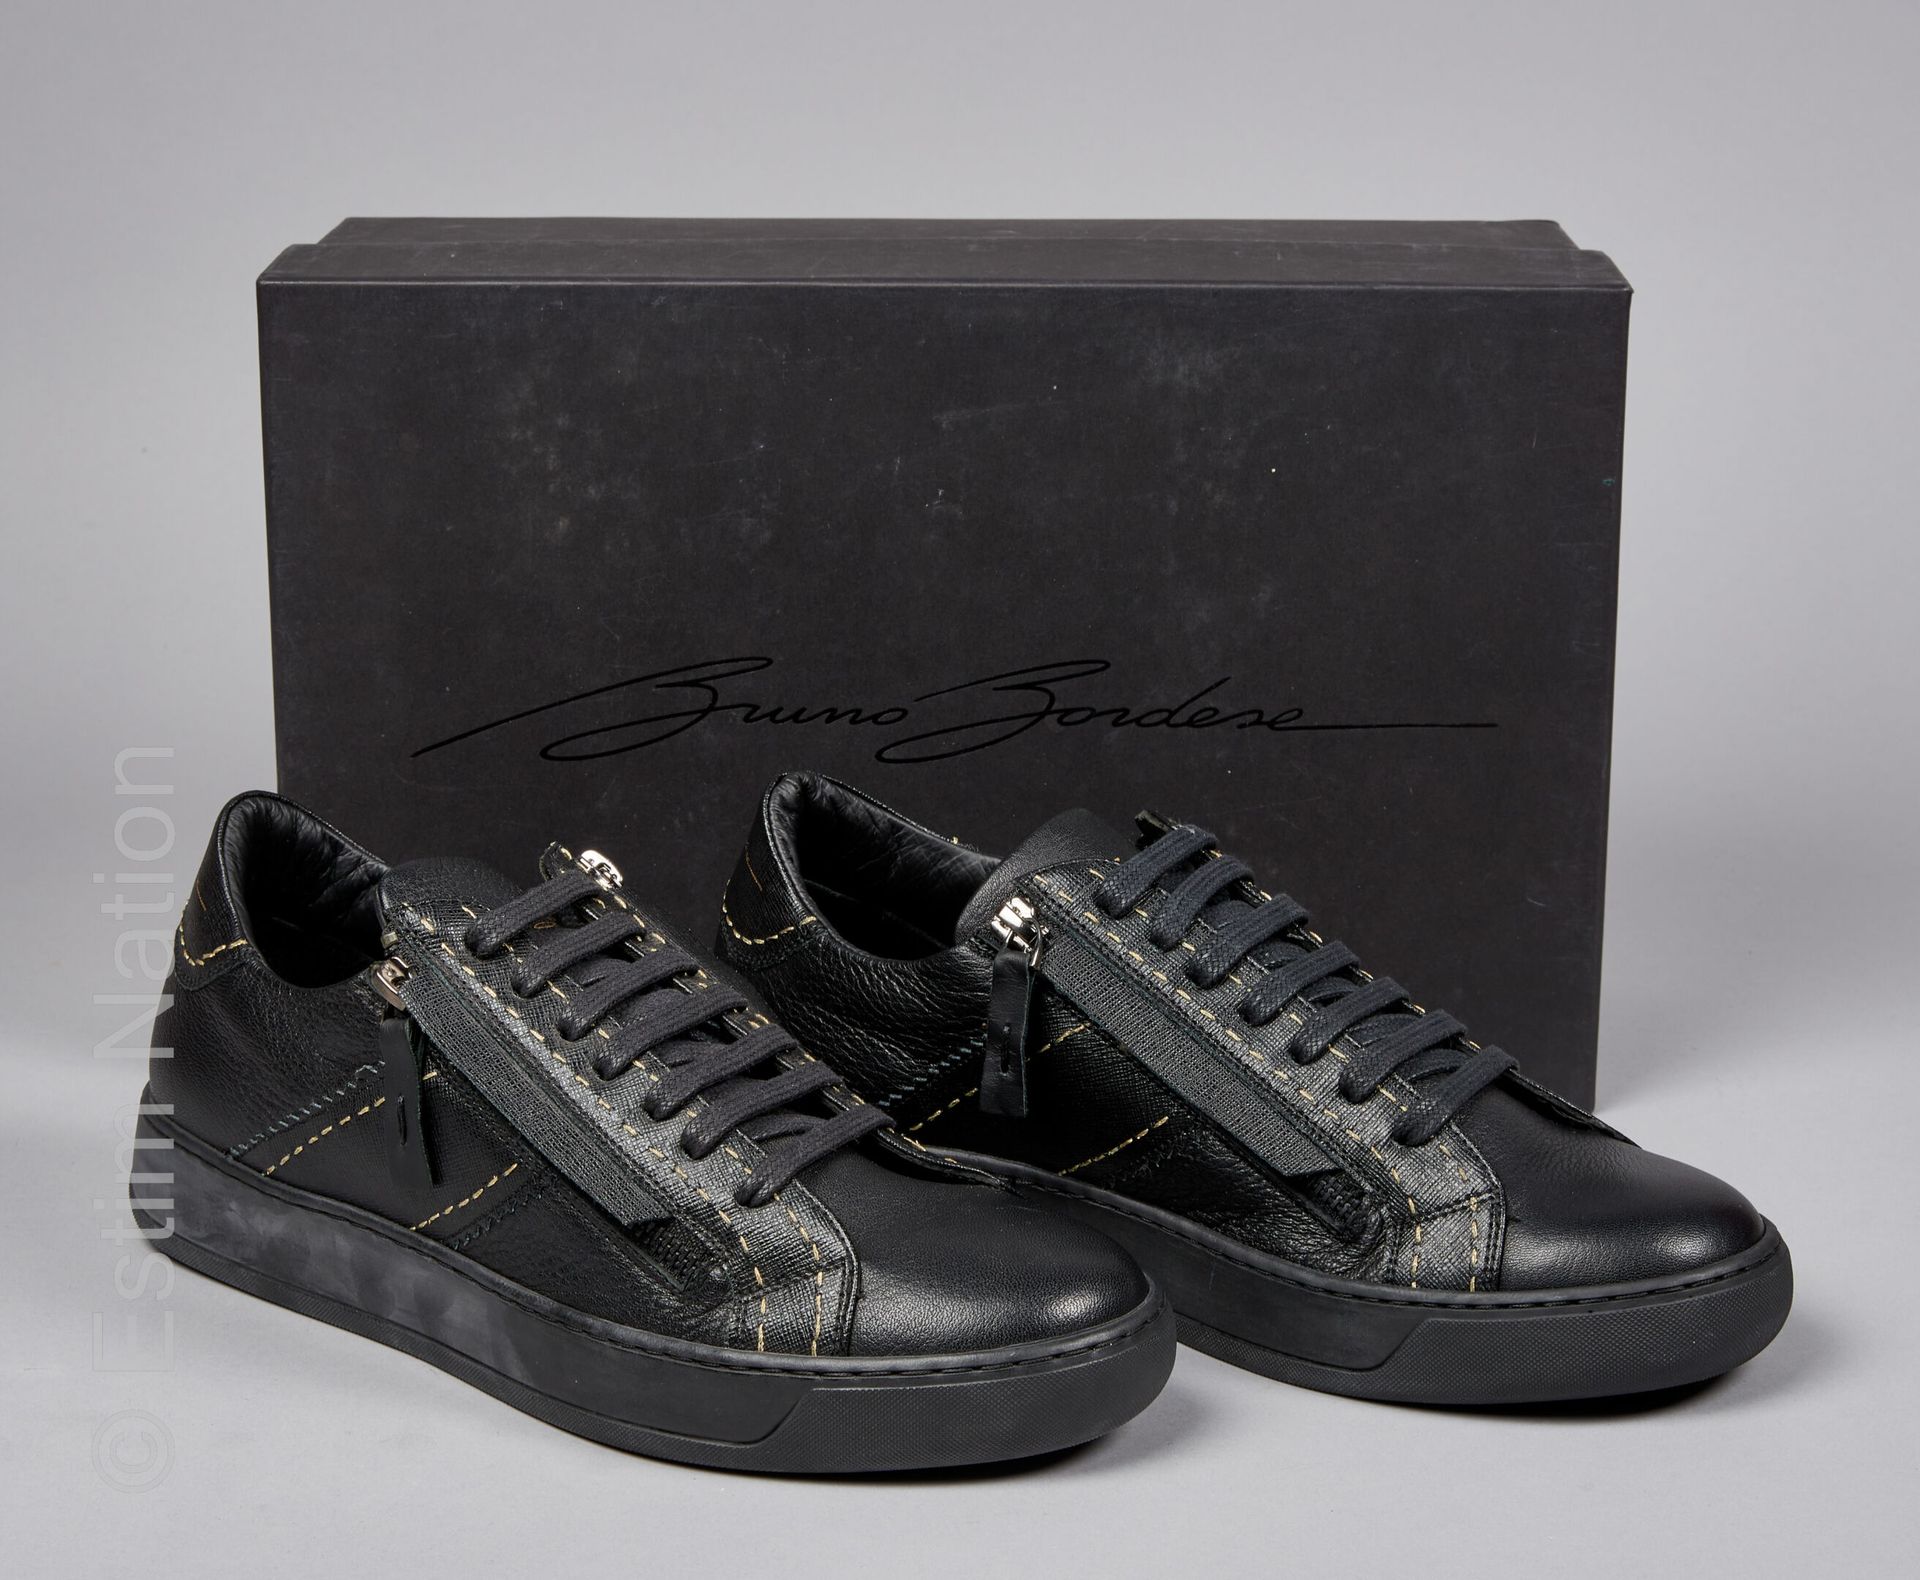 BRUNO BORDESE Pair of black saffiano and nappa leather low top sneakers (P 41) (&hellip;